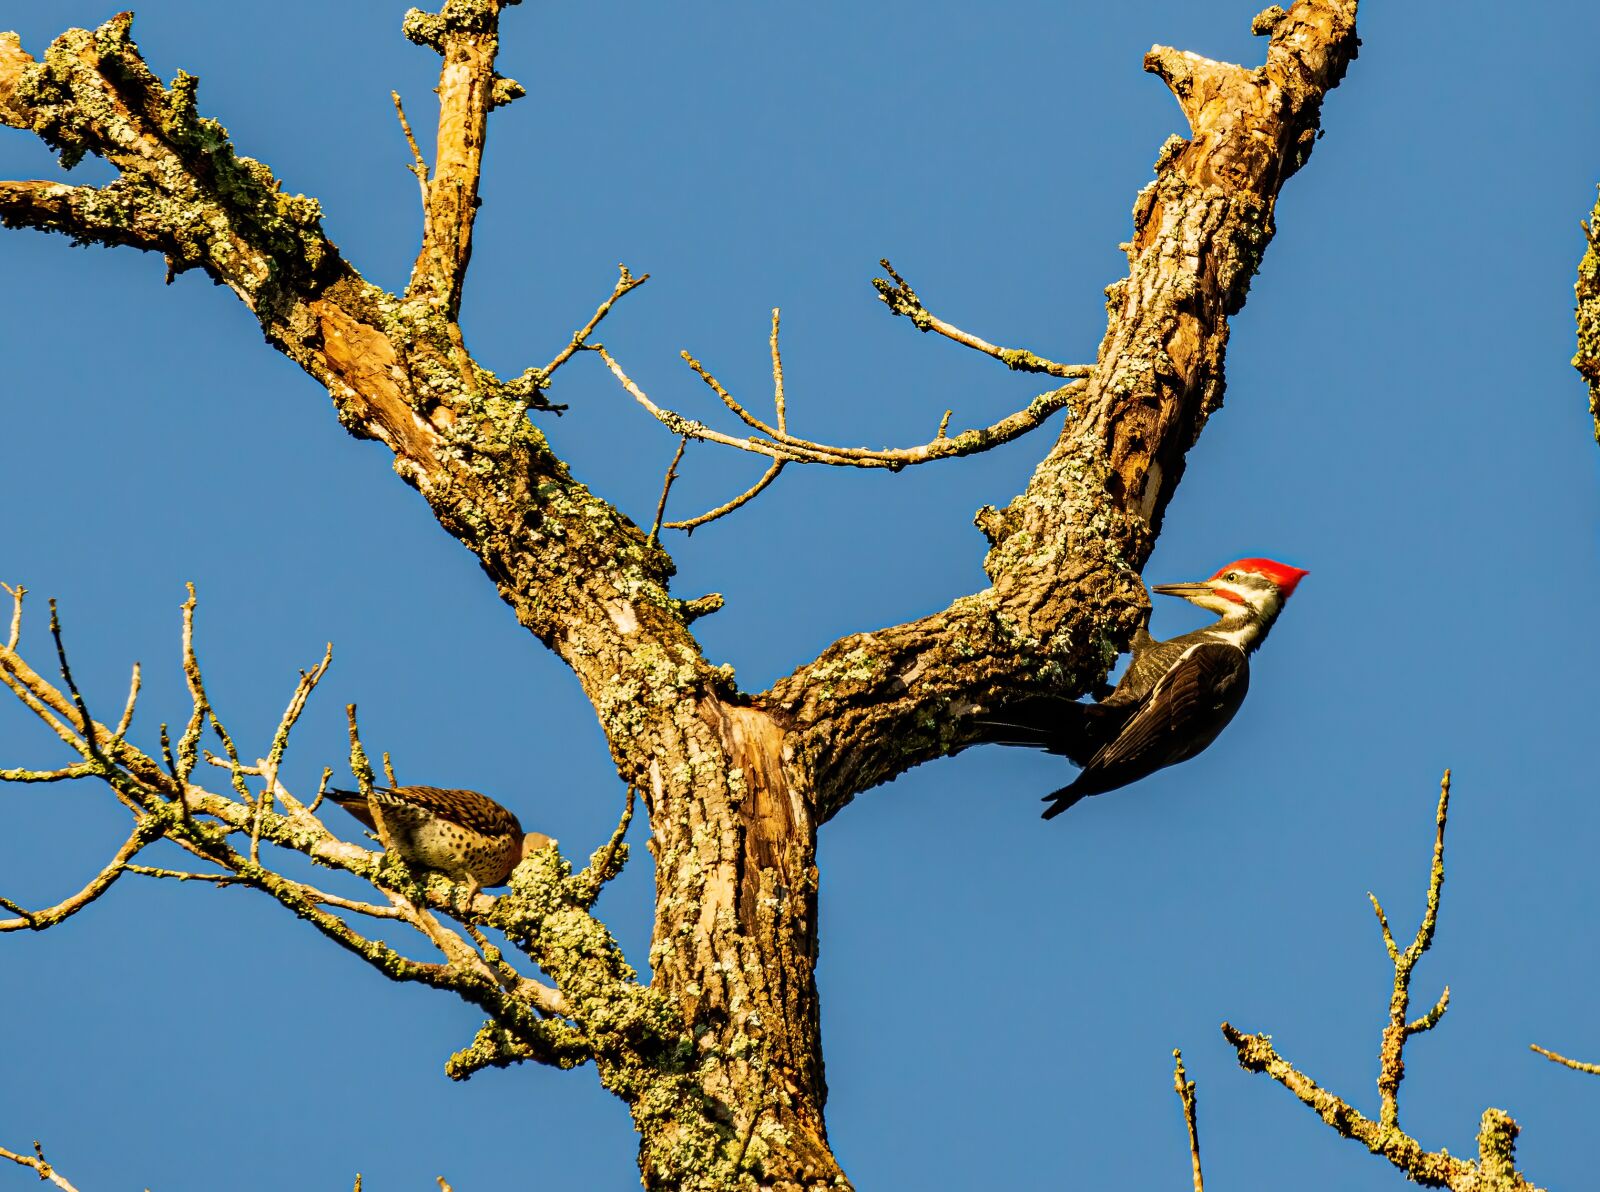 Sony a6400 sample photo. "Pileated woodpecker, pileated woodpecker" photography